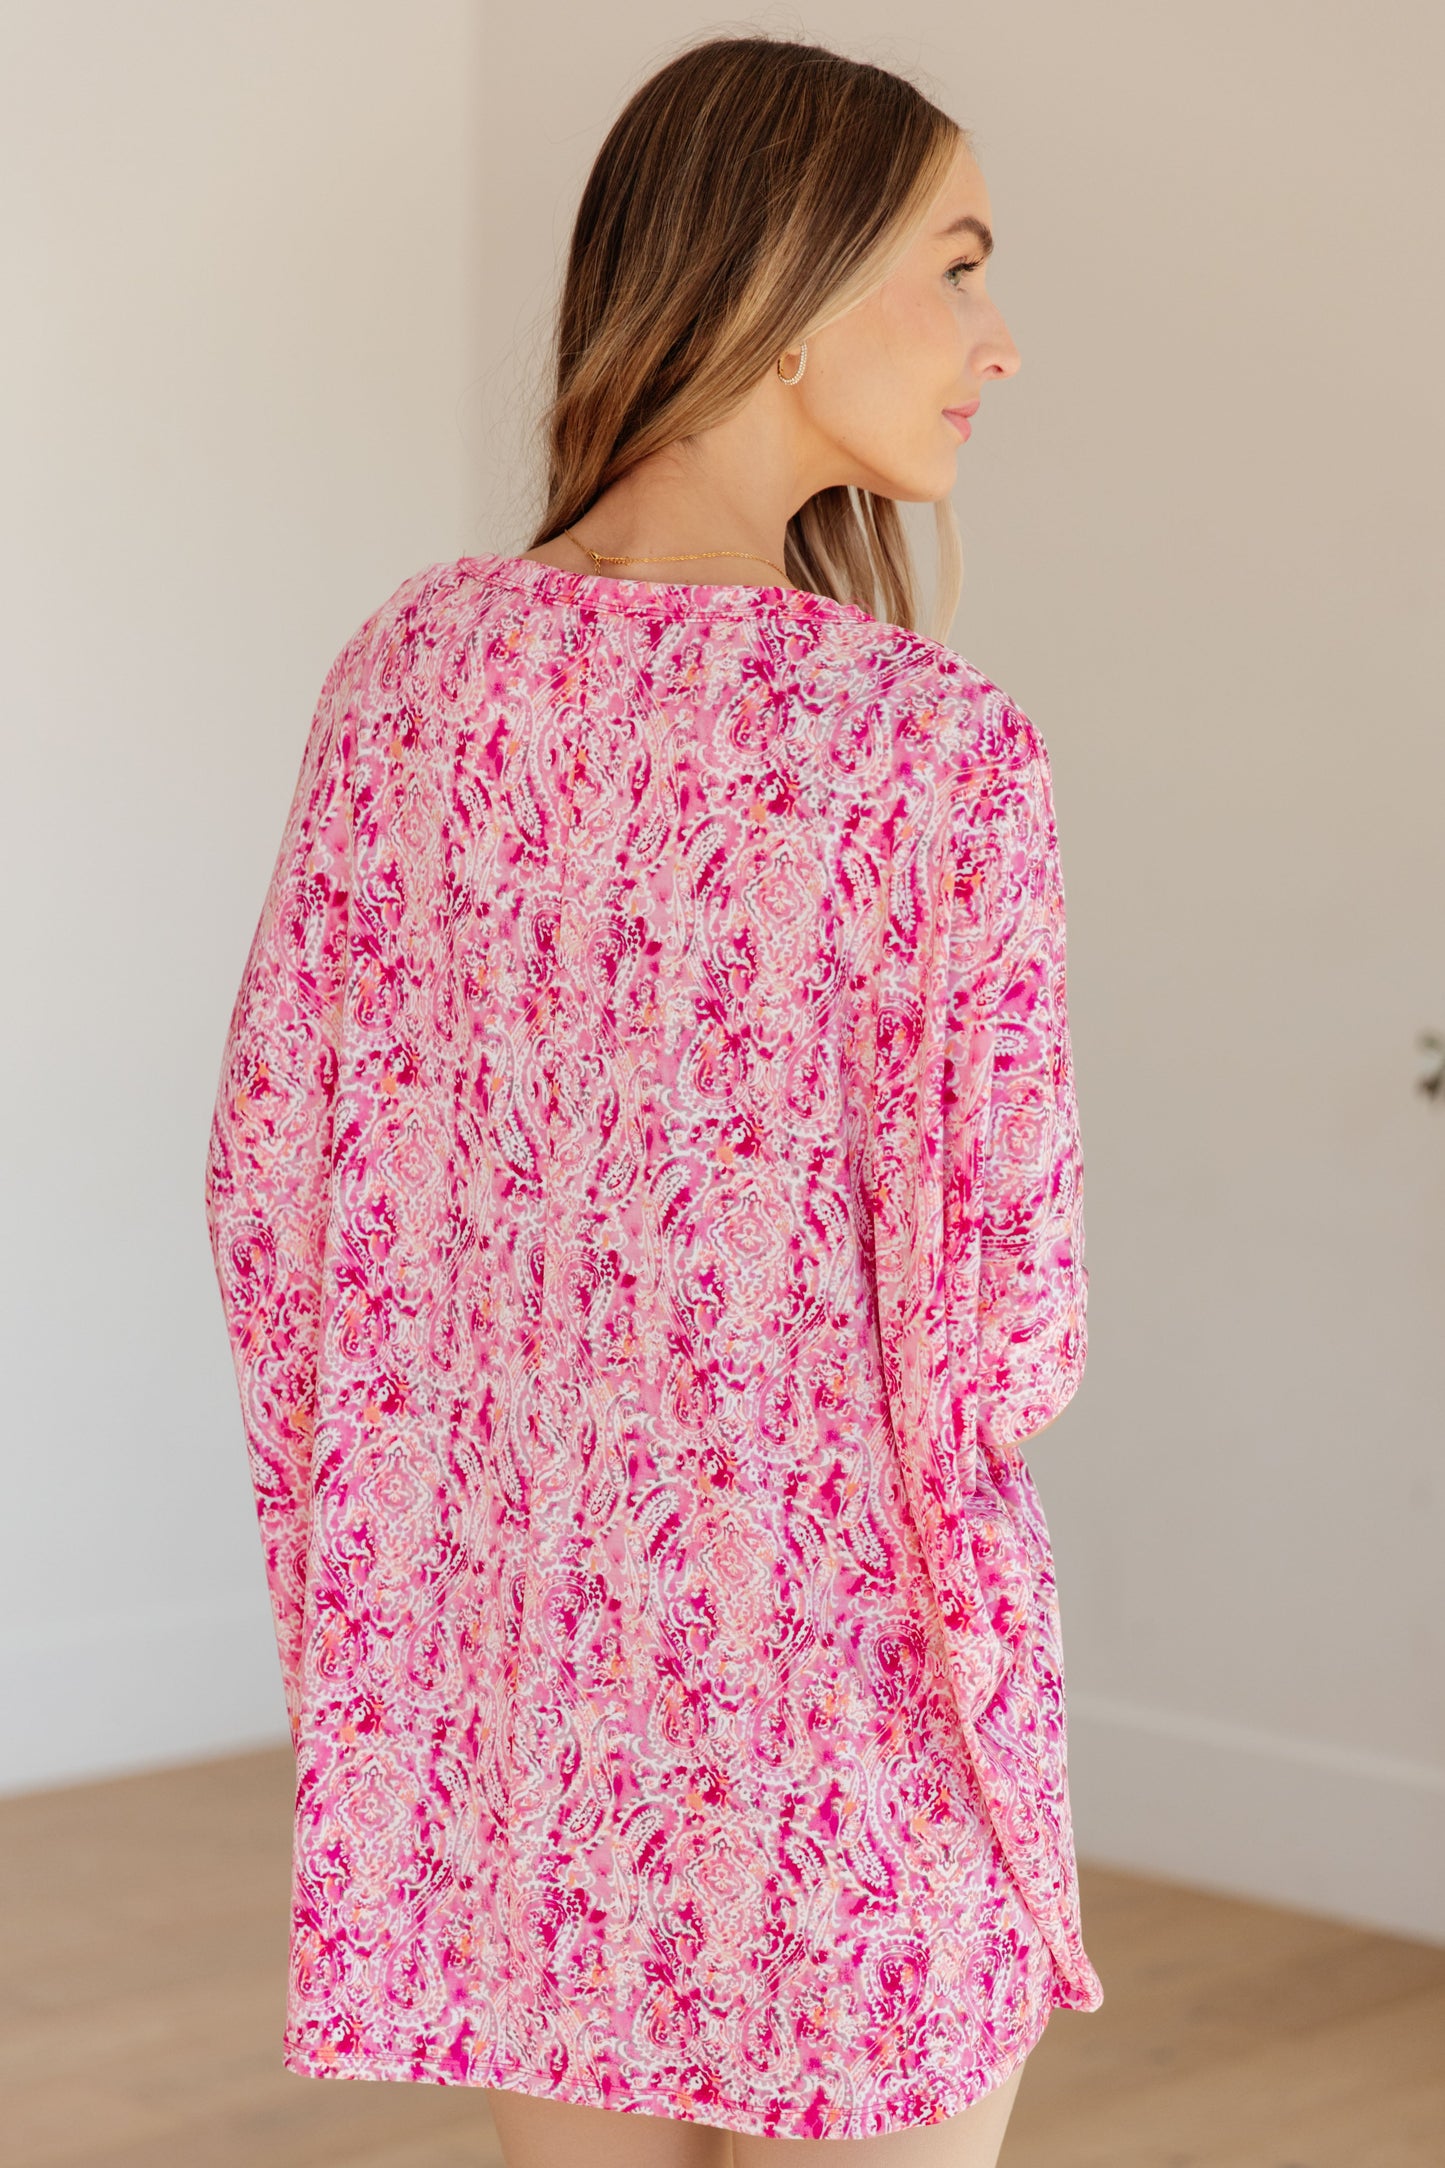 Blouse in Fuchsia and White Paisley